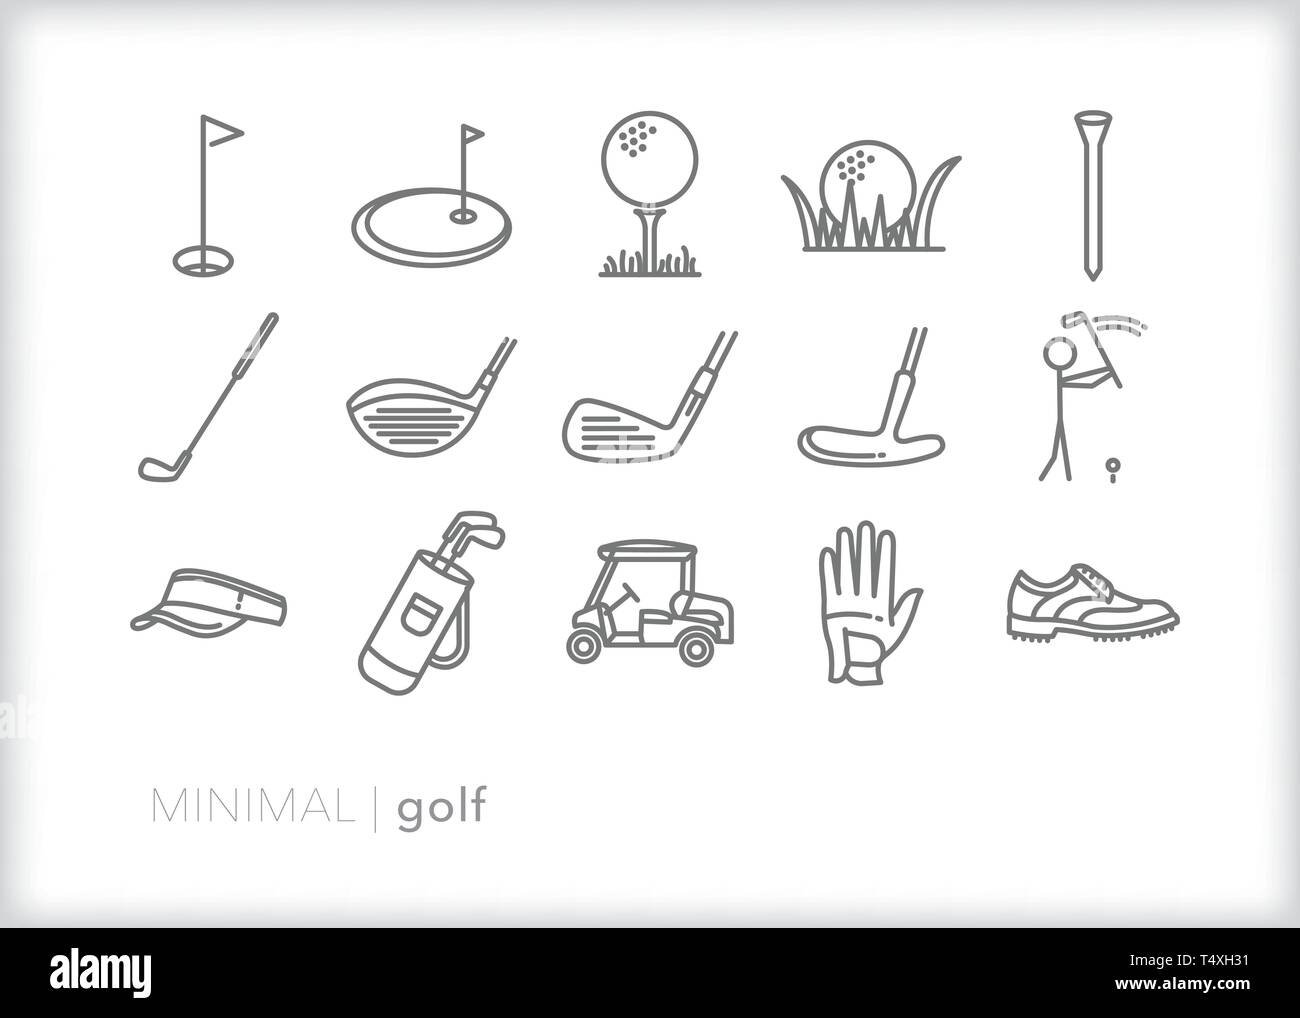 Set of 15 golf line icons for playing a round Stock Vector